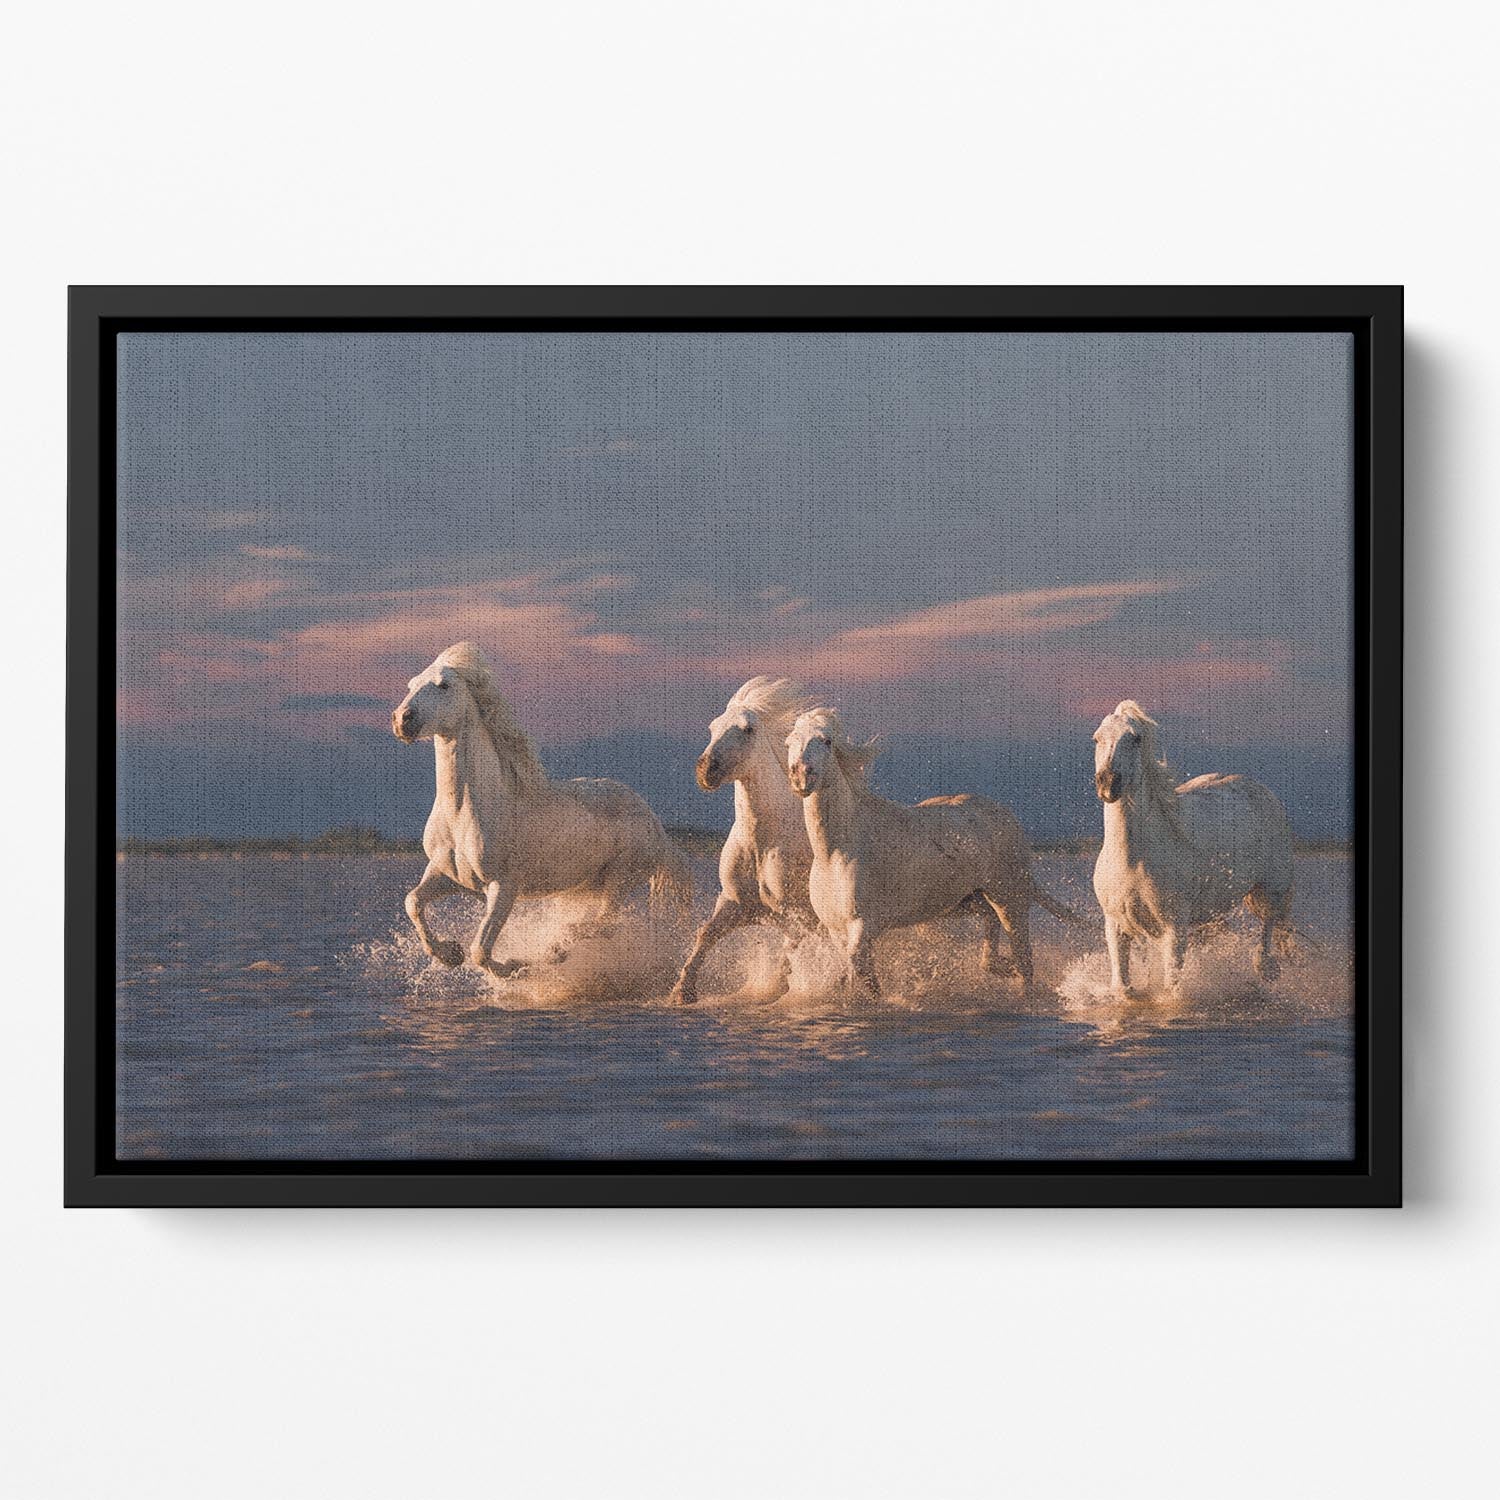 Wite Horses Running In Water 2 Floating Framed Canvas - Canvas Art Rocks - 2